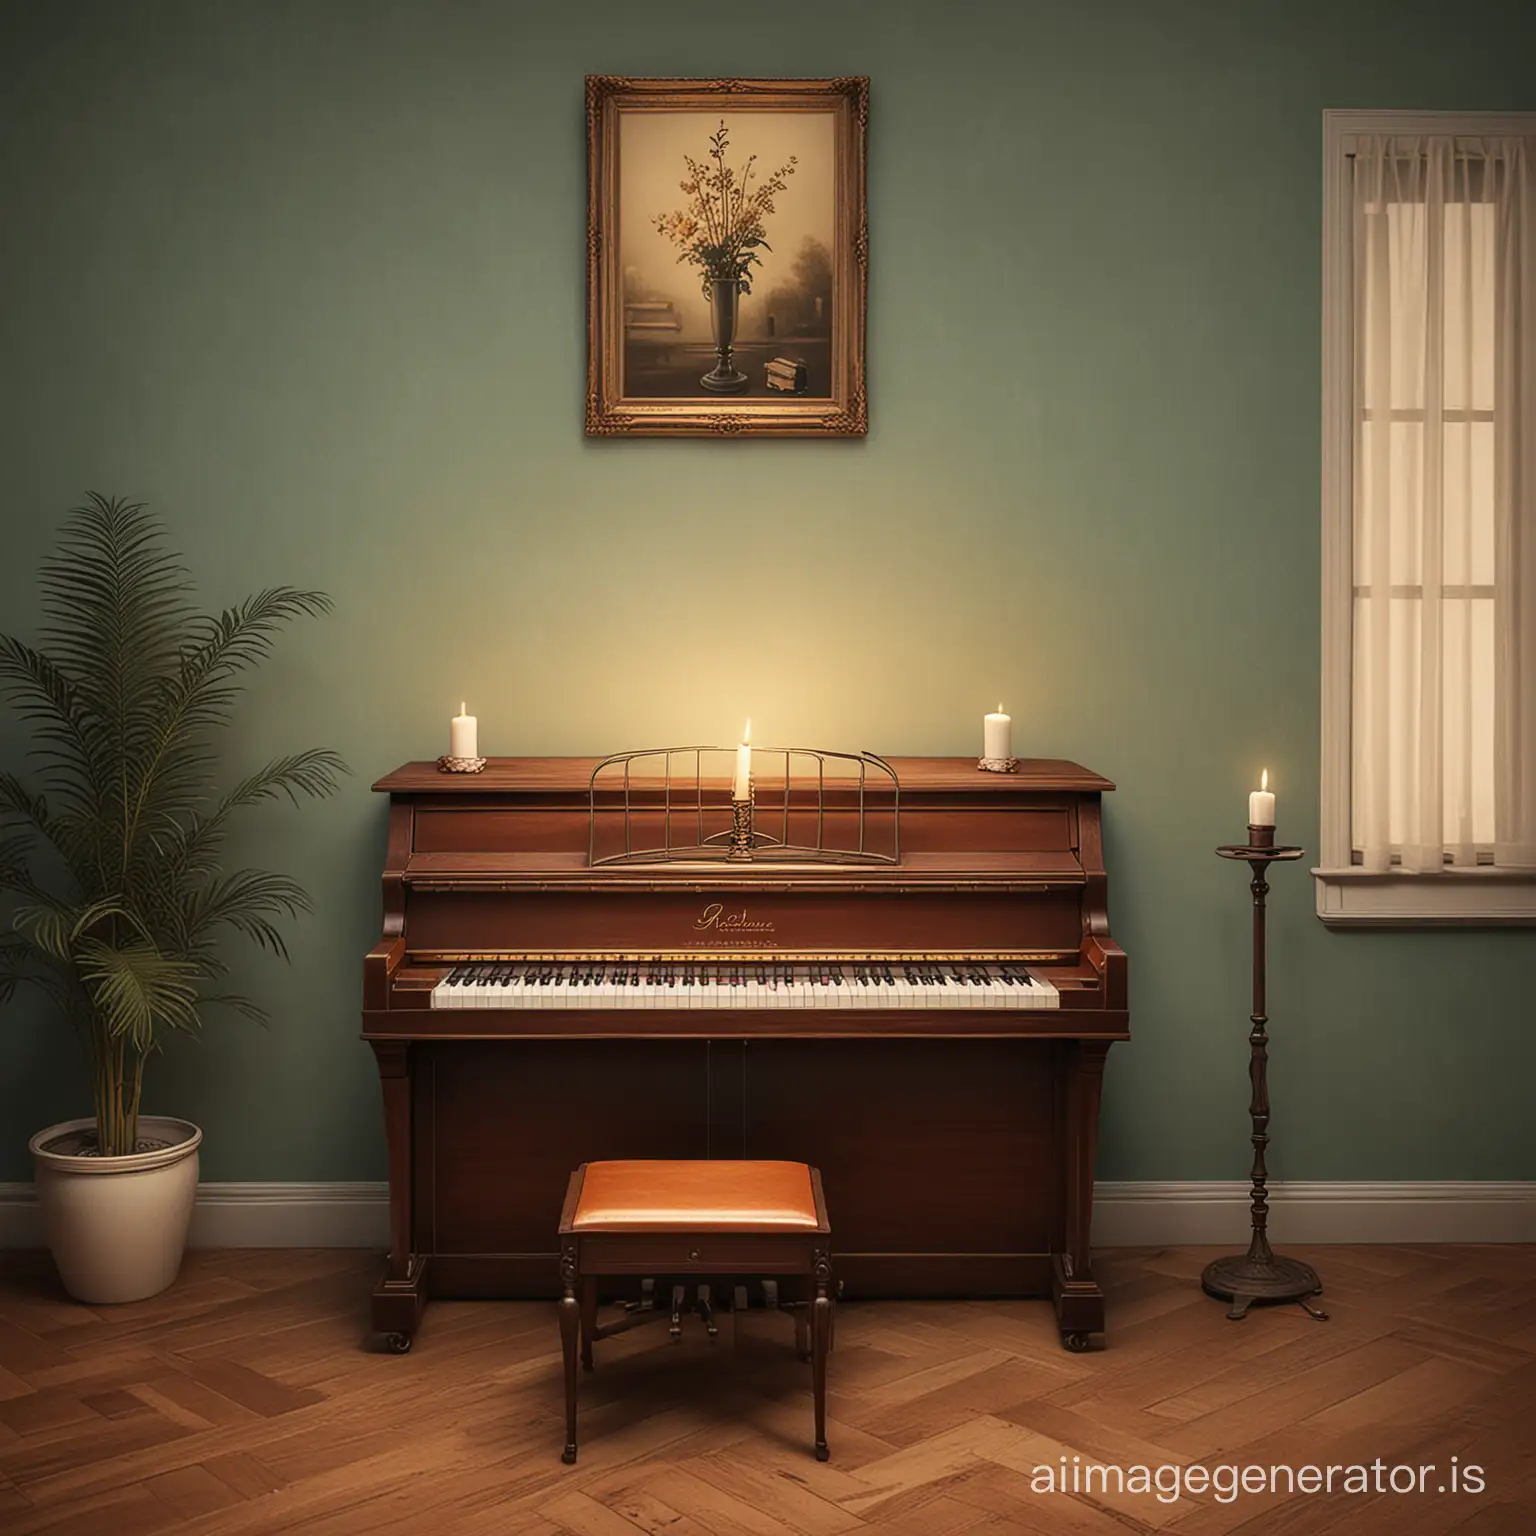 A 1920s piano in an empty room, in the late evening, in a slightly illustrated vintage style, in the style of a 1920s poster, in a vintage whimsical style , with a candle stick on top of the piano